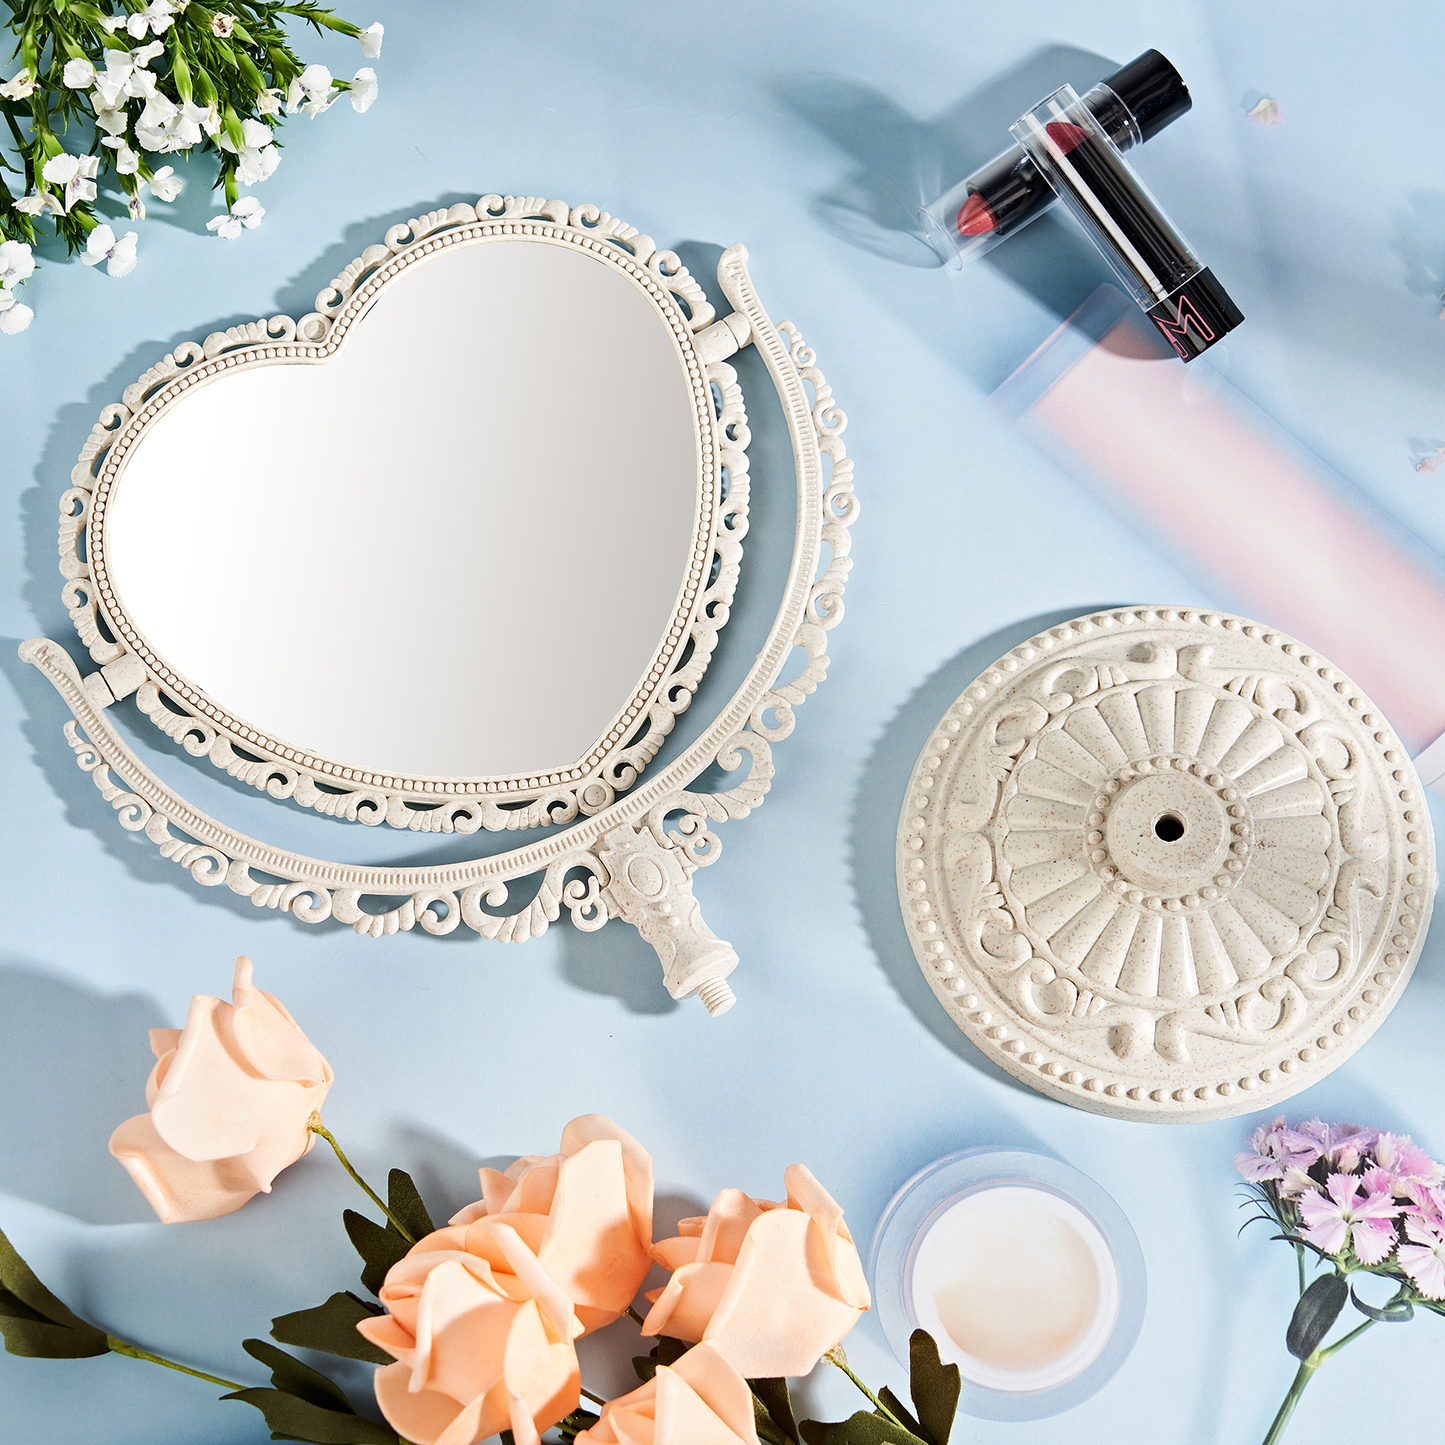 RECEESOON White Heart Mirror Double Sides, Aesthetic Heart Shaped Mirror, Vanity Makeup Mirror for Desk, Cute Vintage Mirror